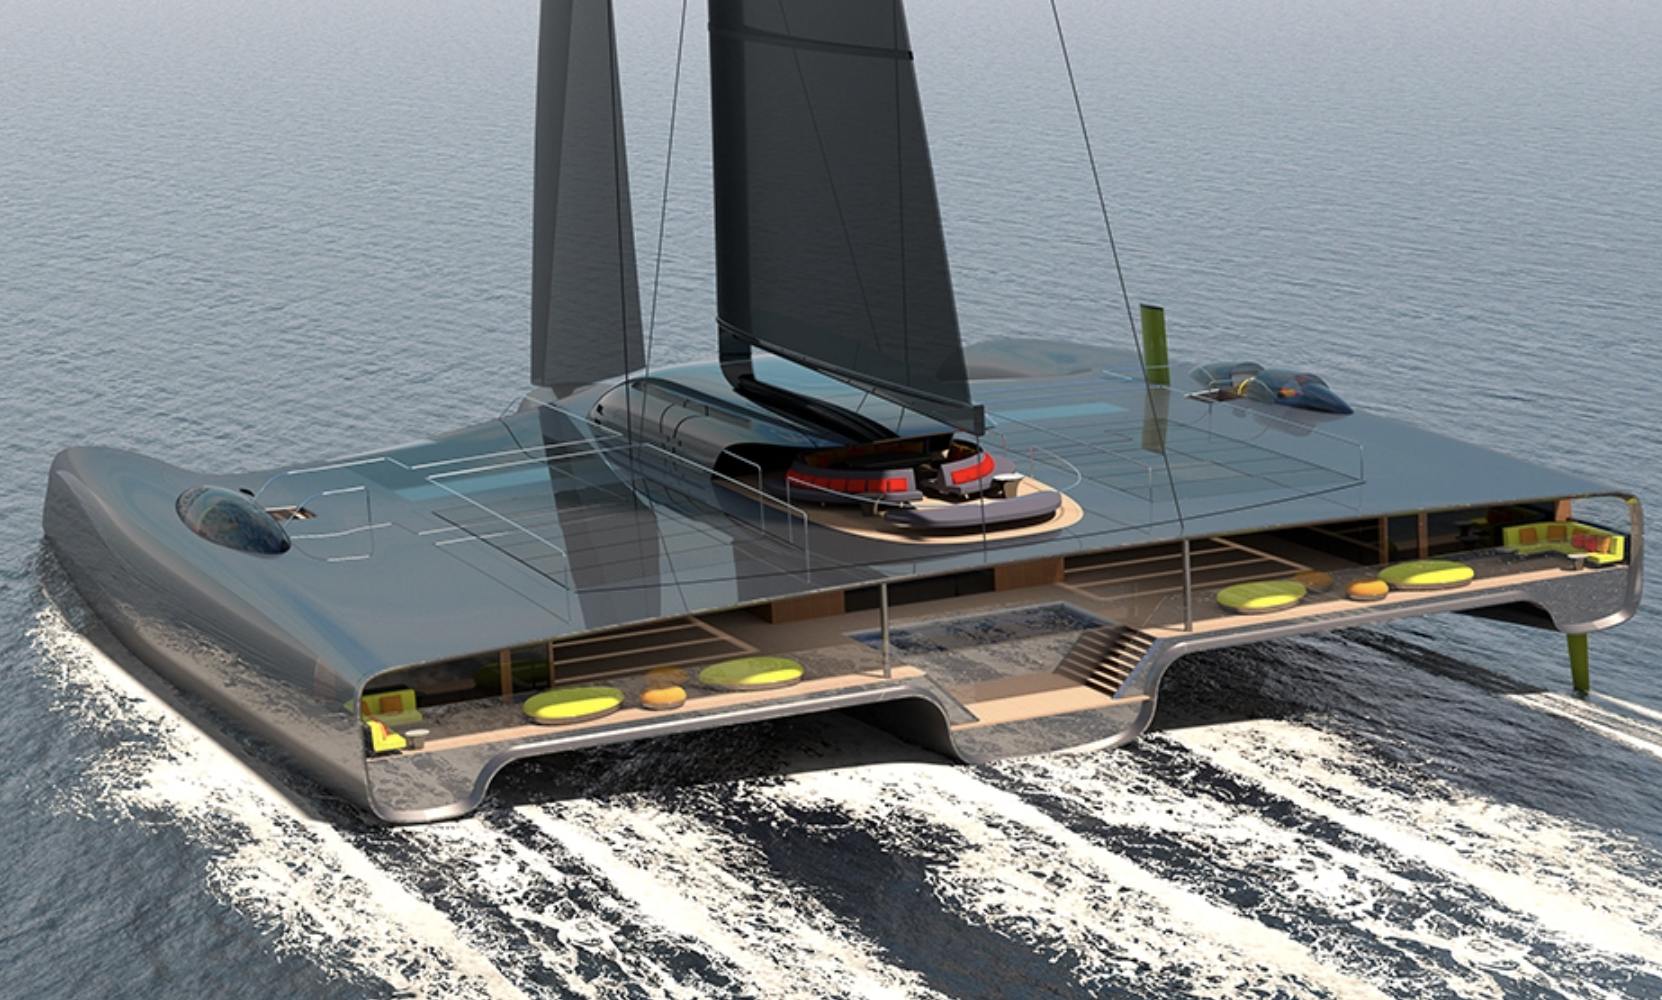 Onboard This Solar-Electric Trimaran Concept